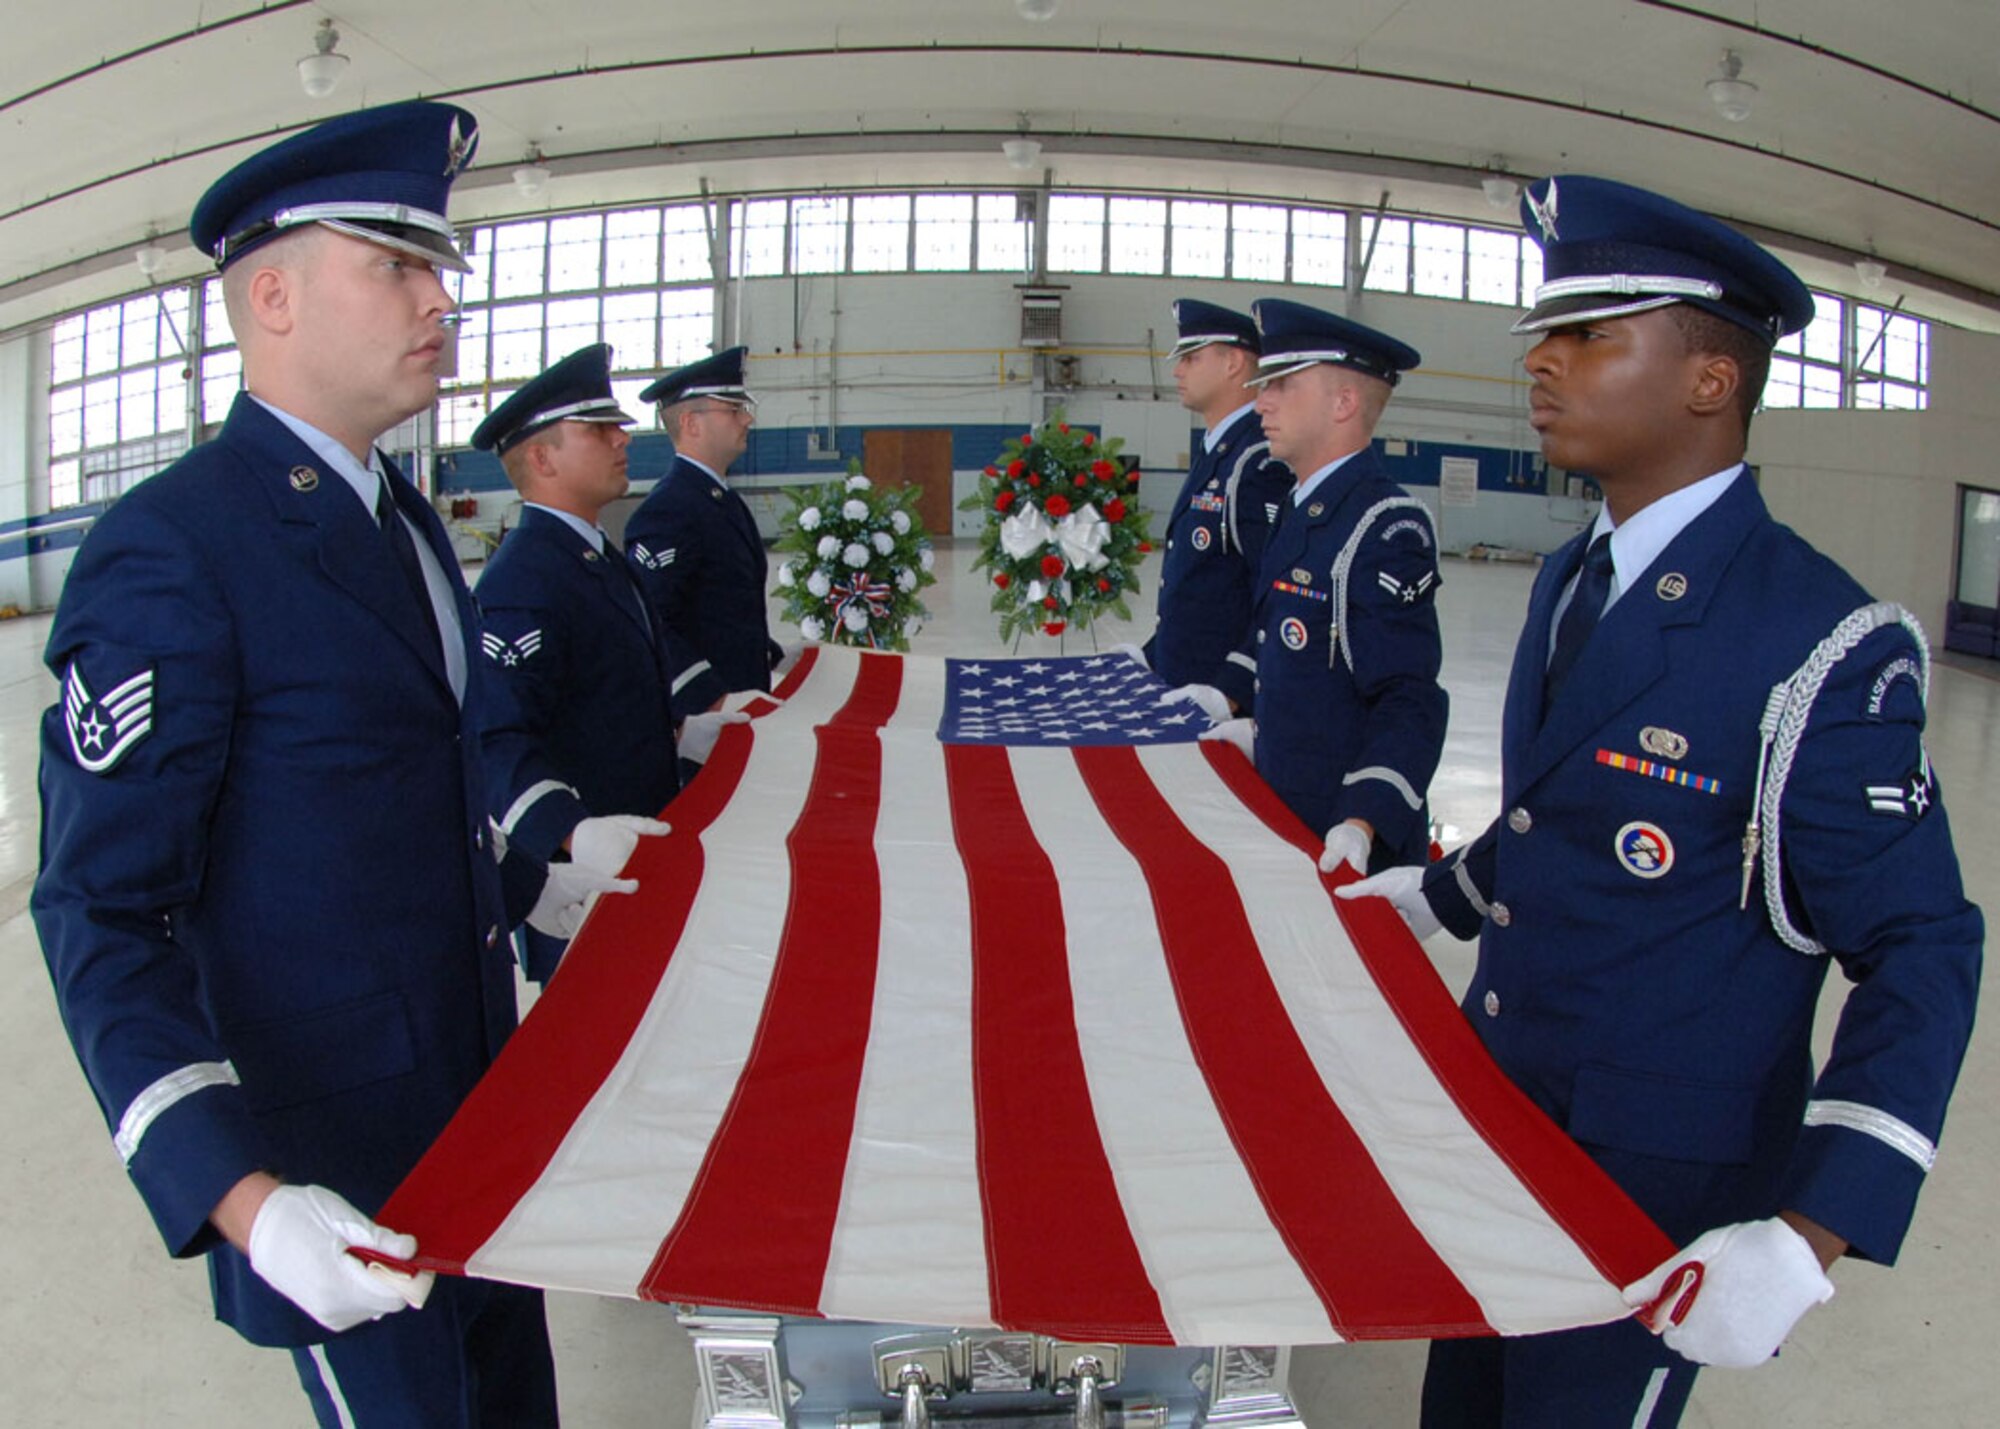 Honor Guard members train long hours to ensure flawless ceremonies for family members. Clockwise from left are Staff Sgt. Michael Duggie, Senior Airman Craig Wytiaz, Senior Airman Shawn Smith, Staff Sgt. Danial Salkowski, Airman 1st Class Robert Joyce, and Airman 1st Class Isaac Garden. (Courtesy photo)